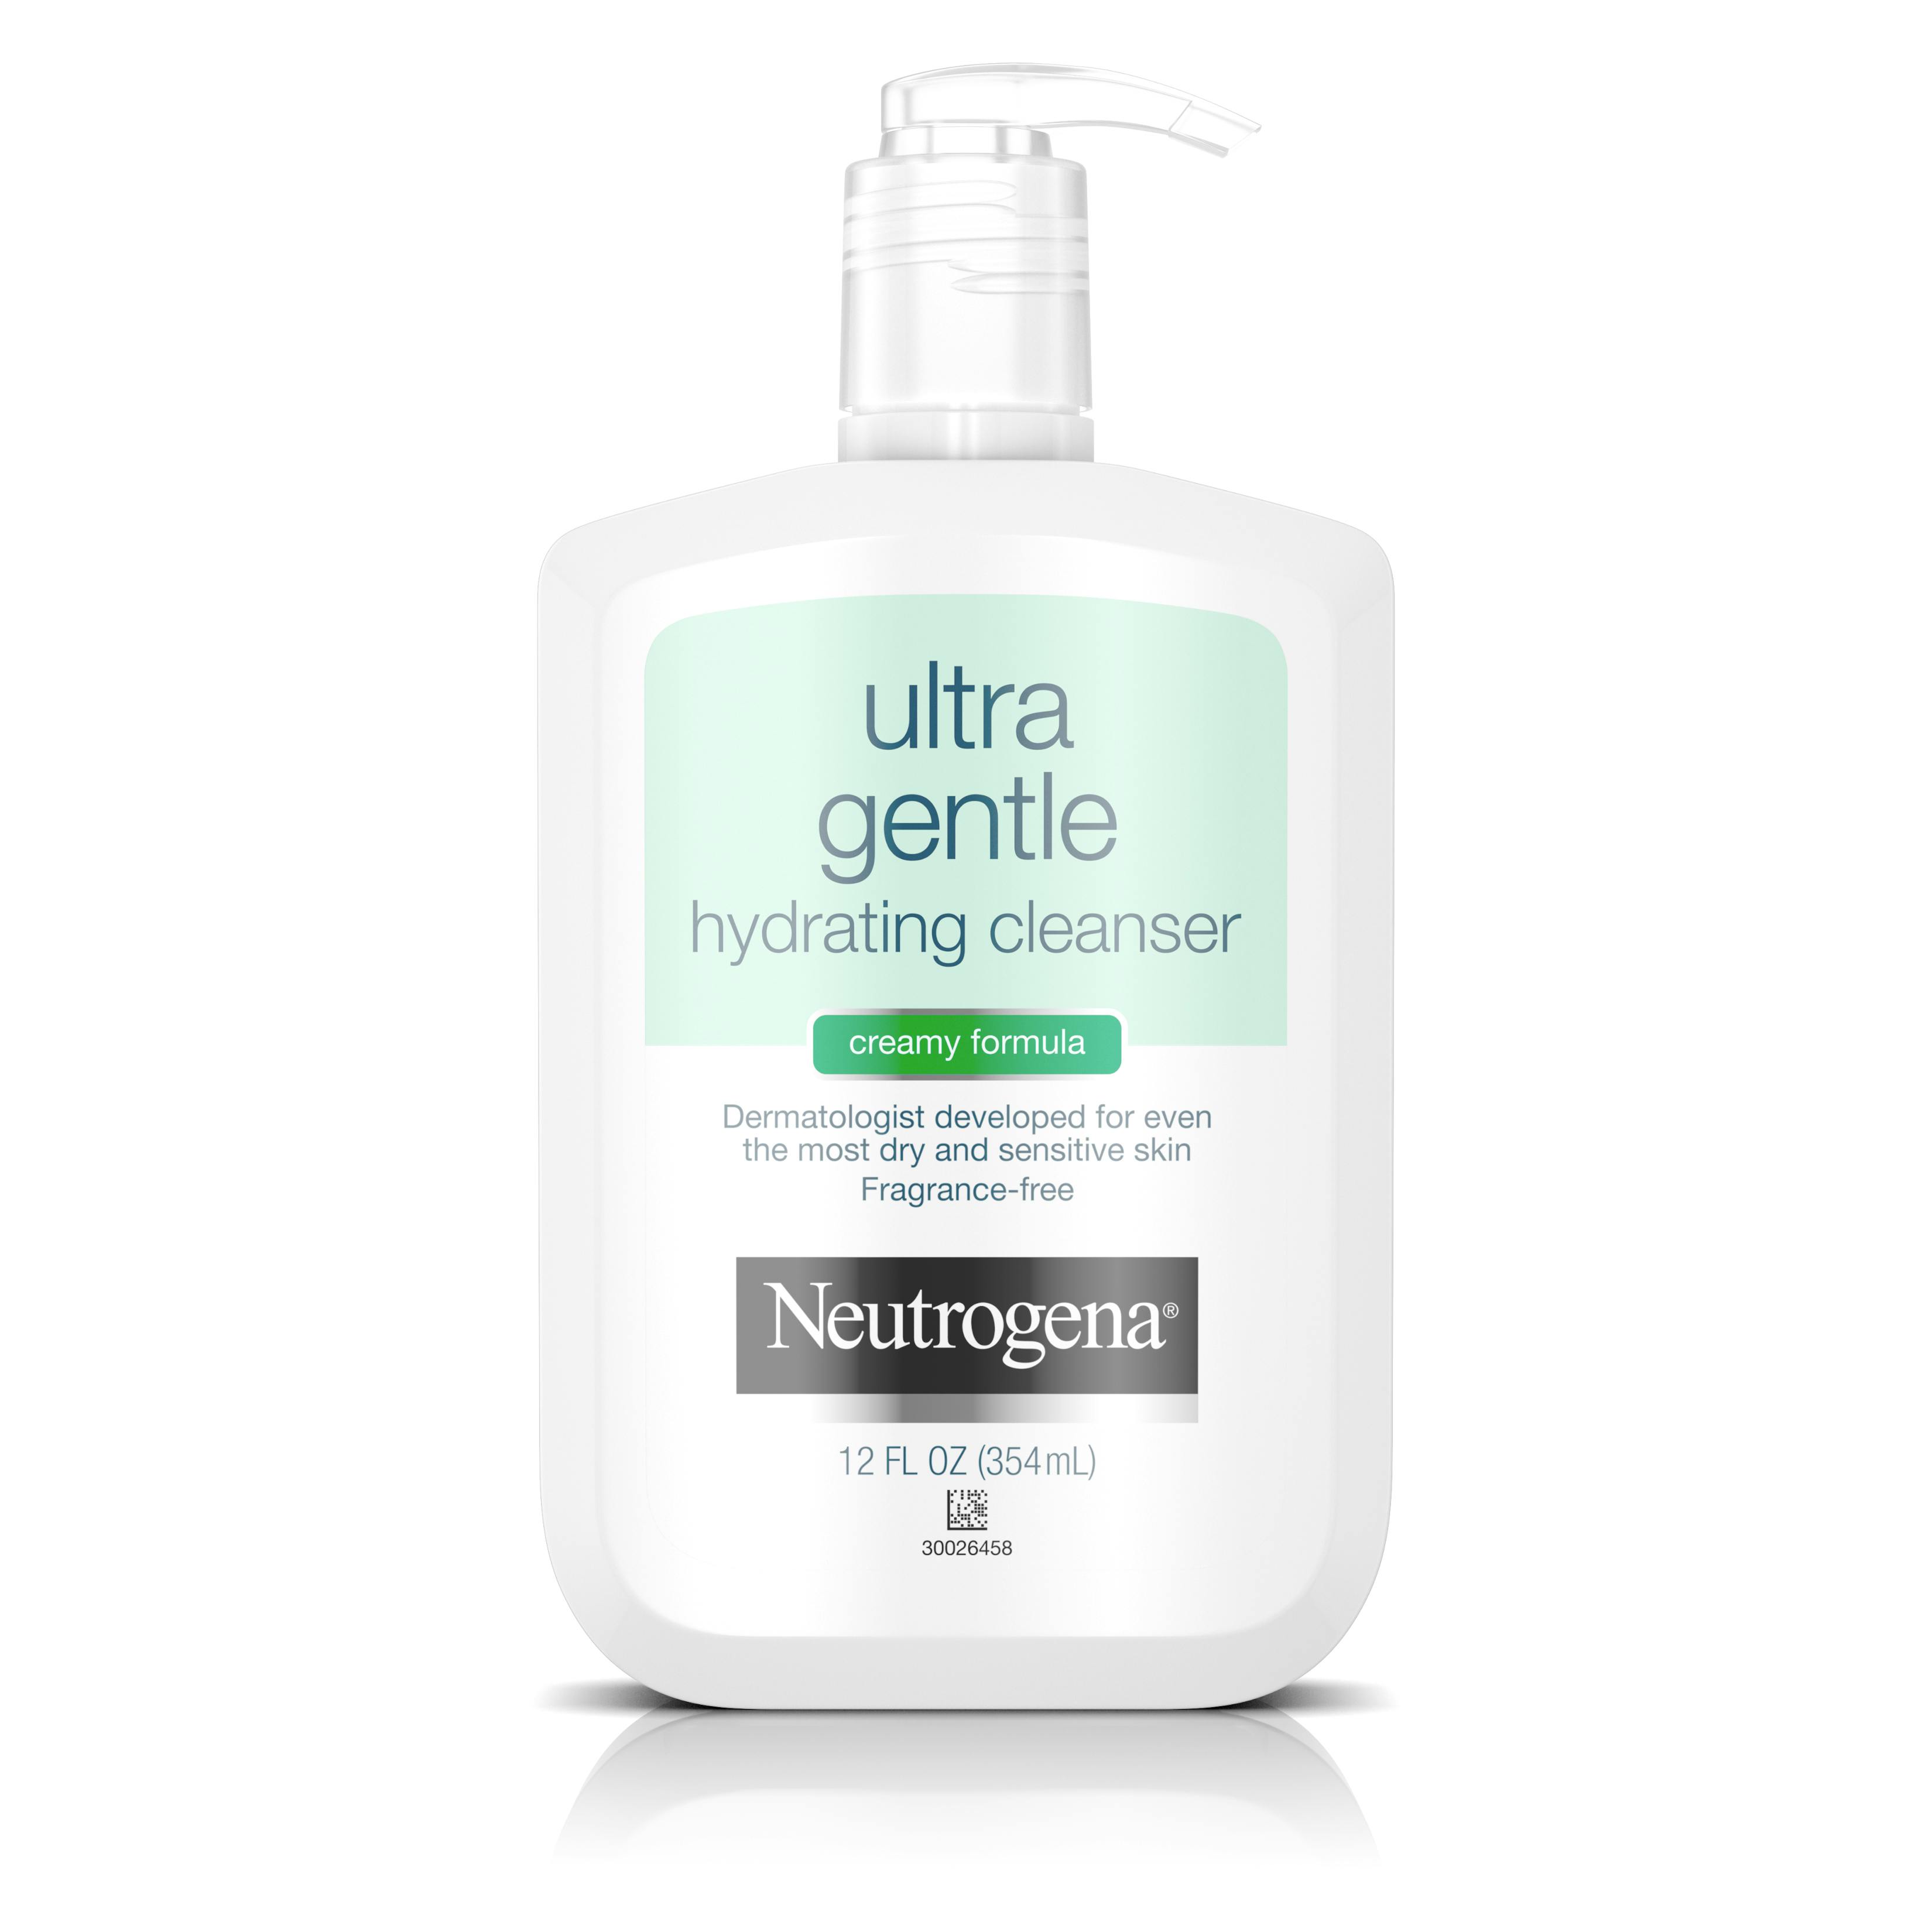 hydrating cleanser